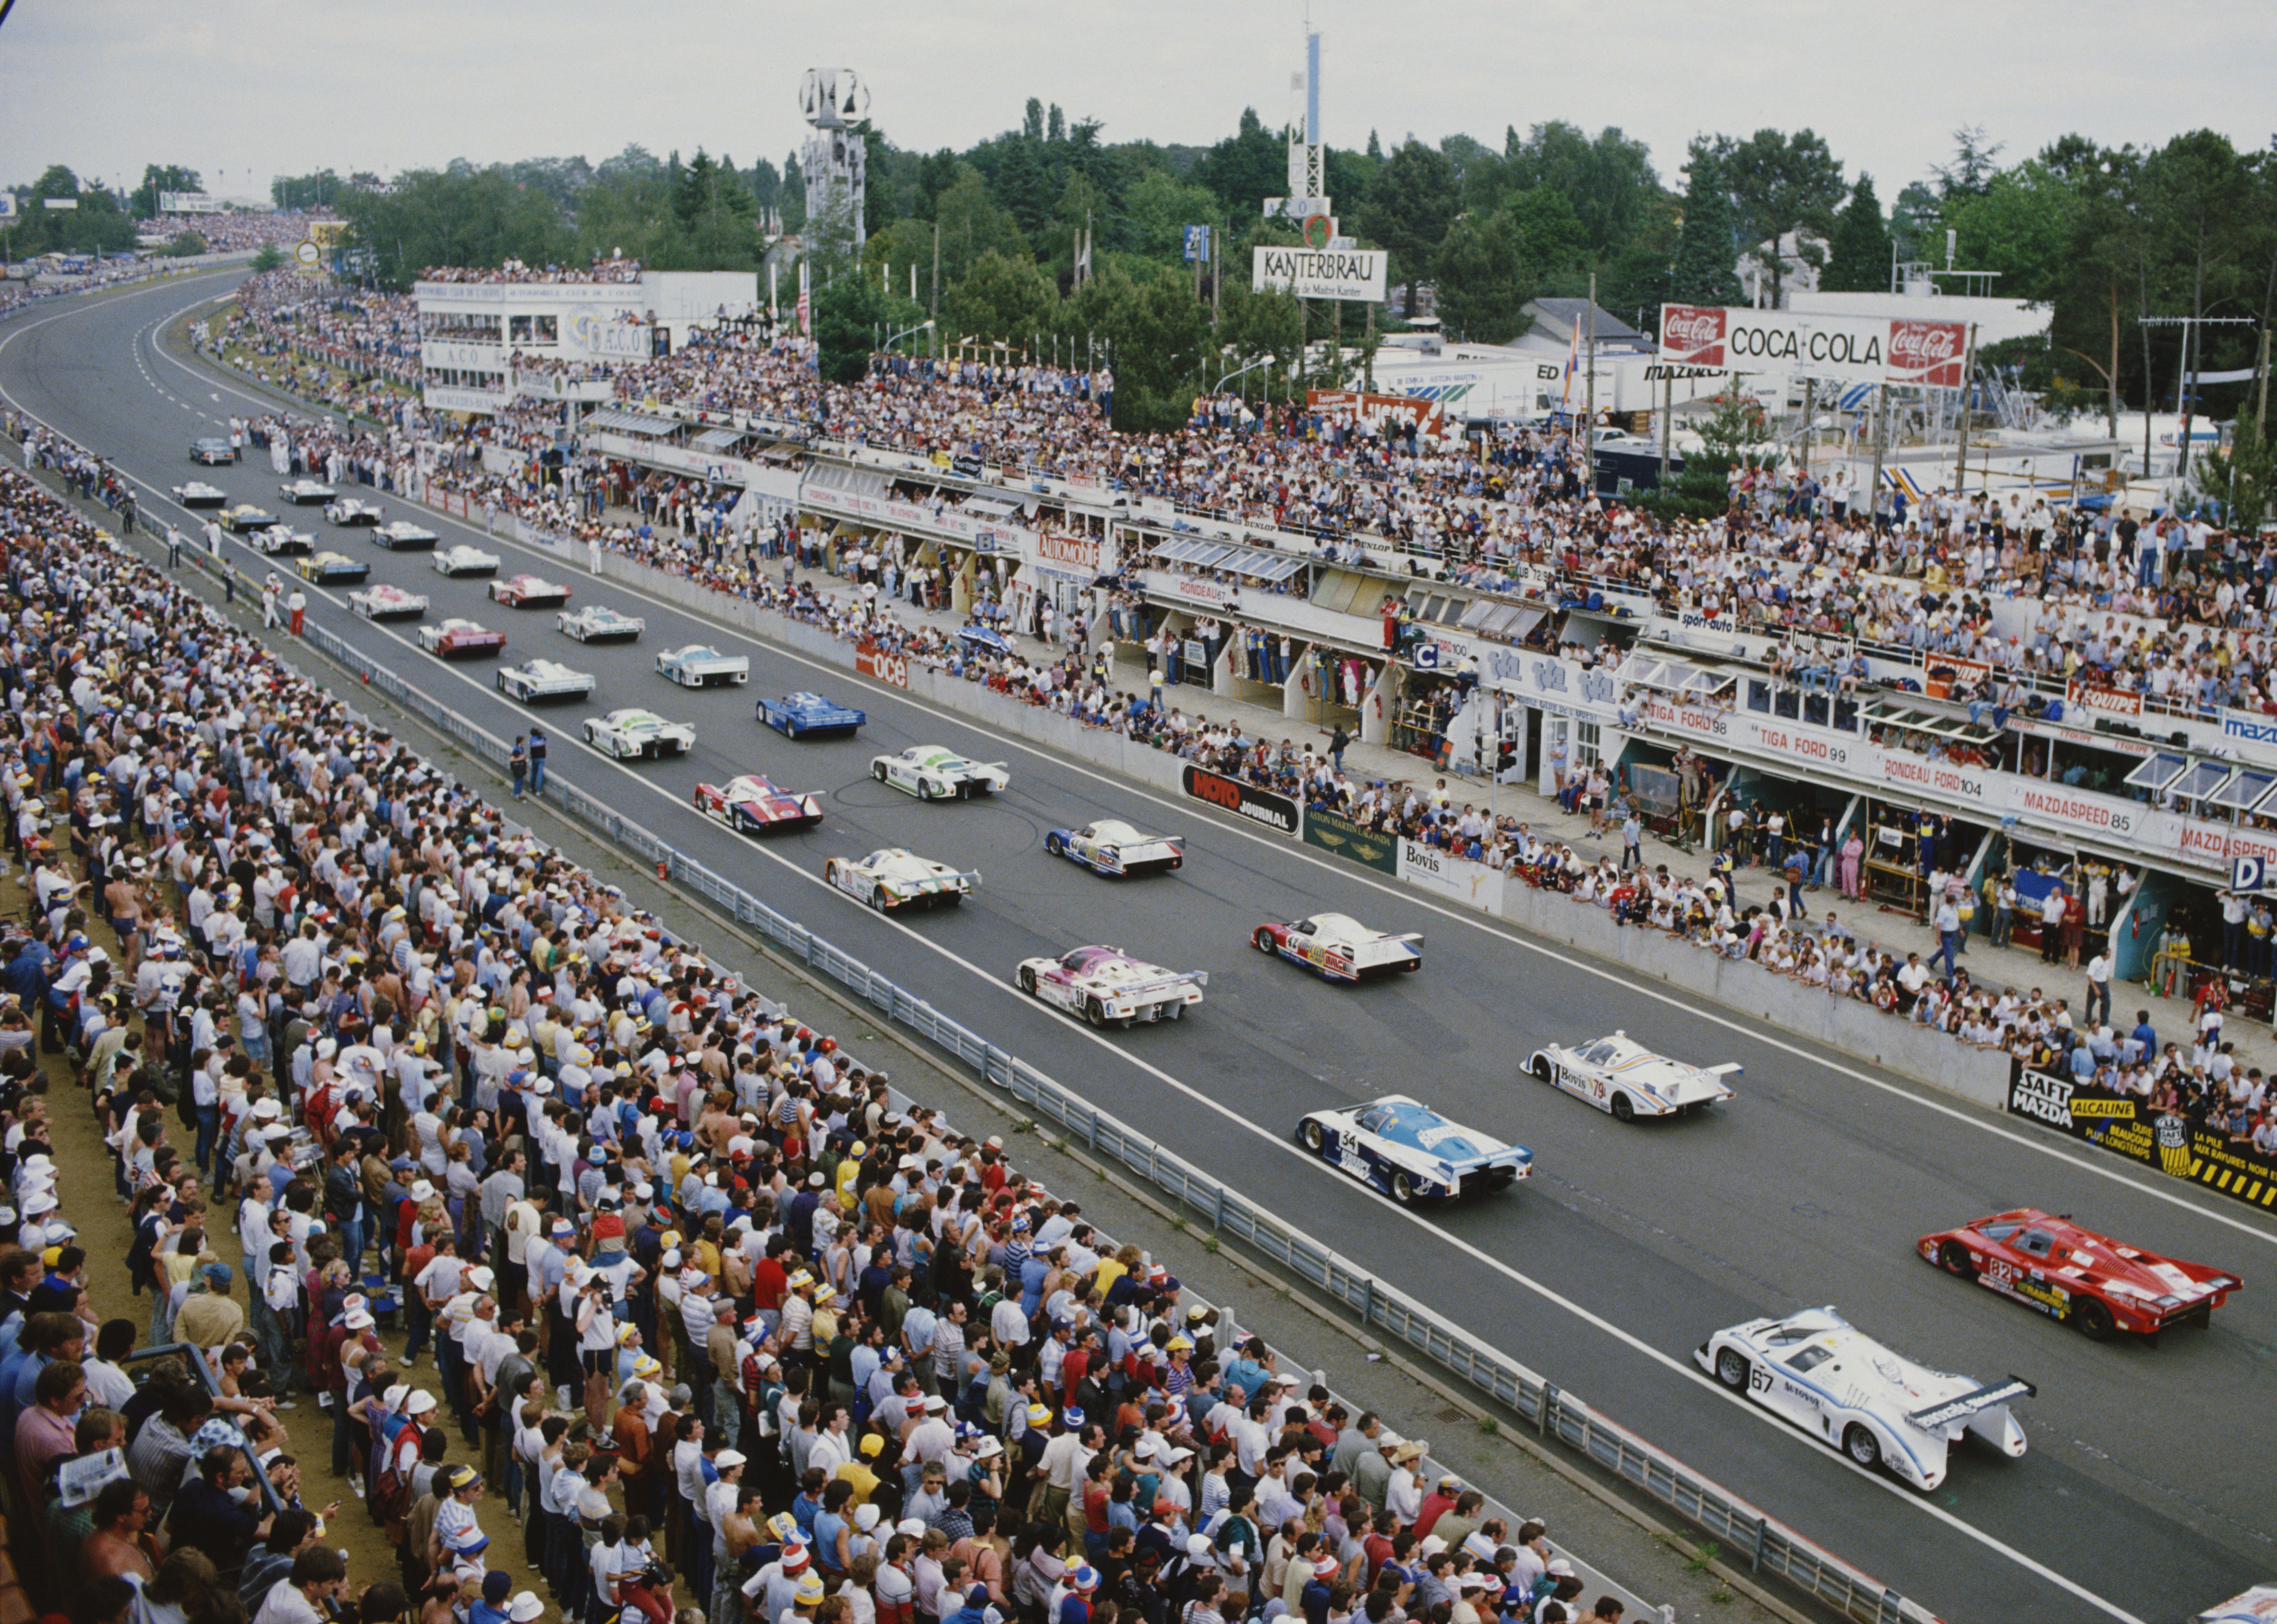 Cars line up on the front straight at the 1985 race